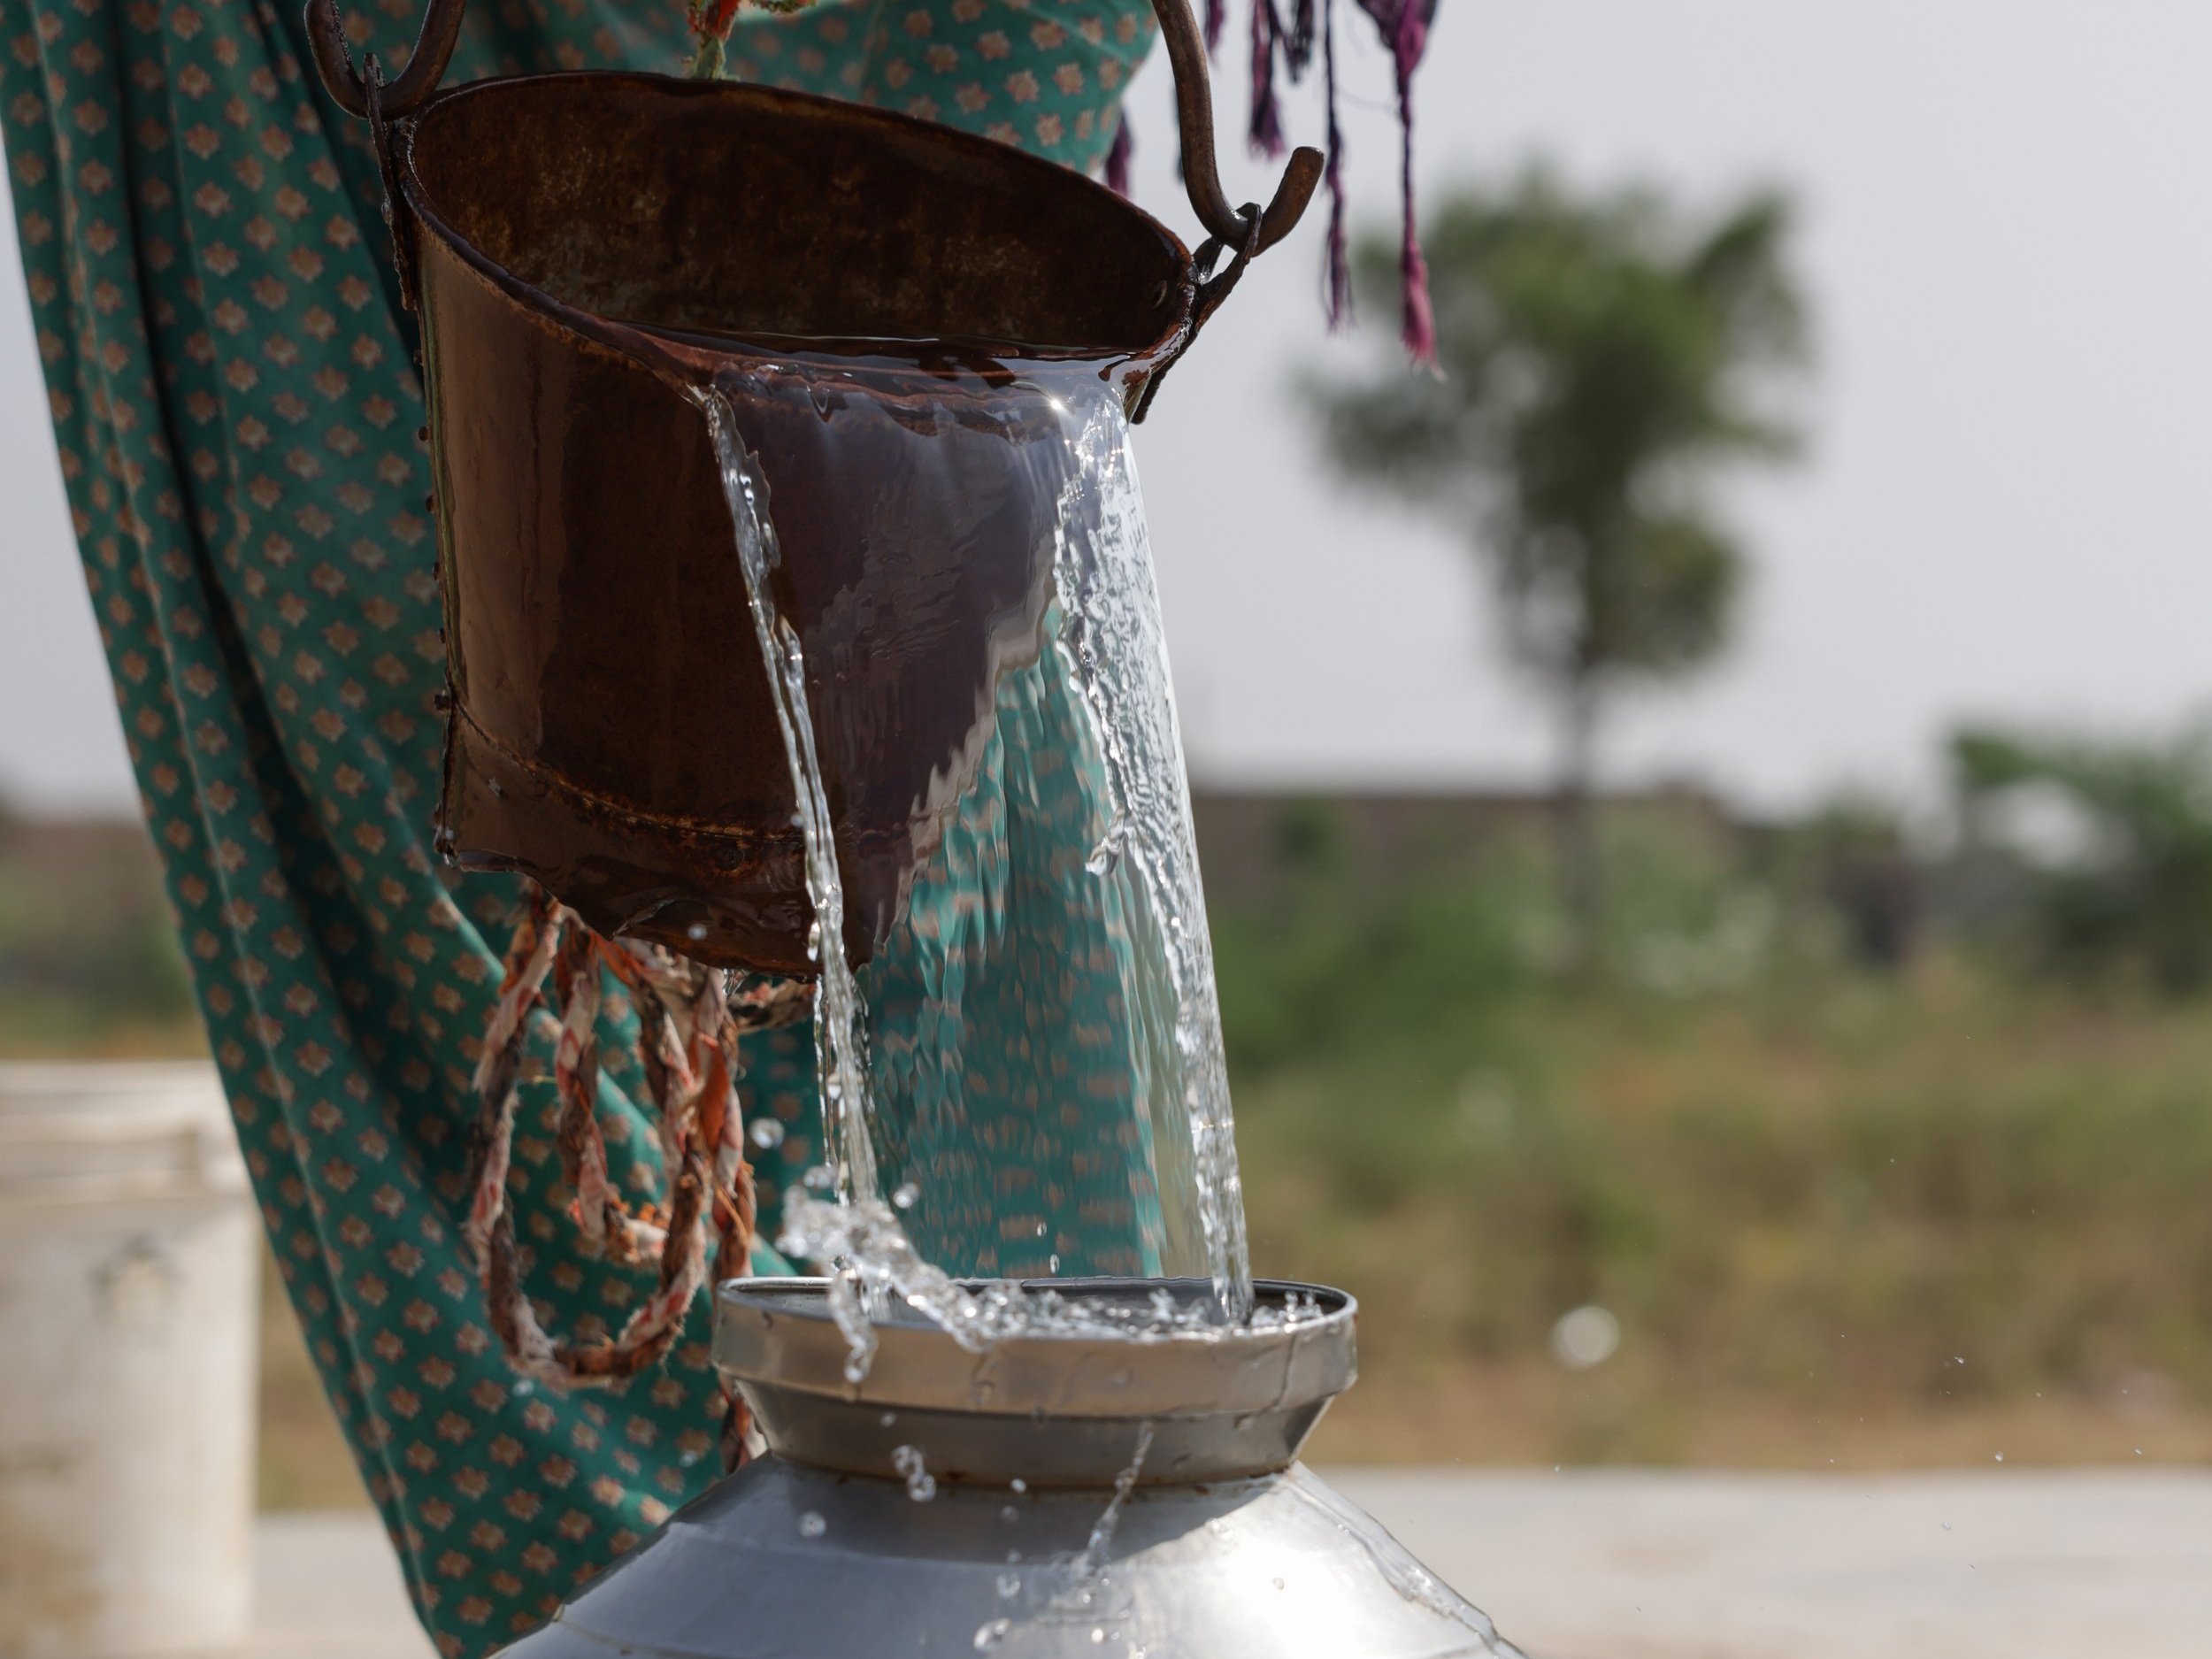 Water is a precious resource in the Thar Desert. Having access to fresh water through the work of OneProsper has changed the lives of many families in the area.